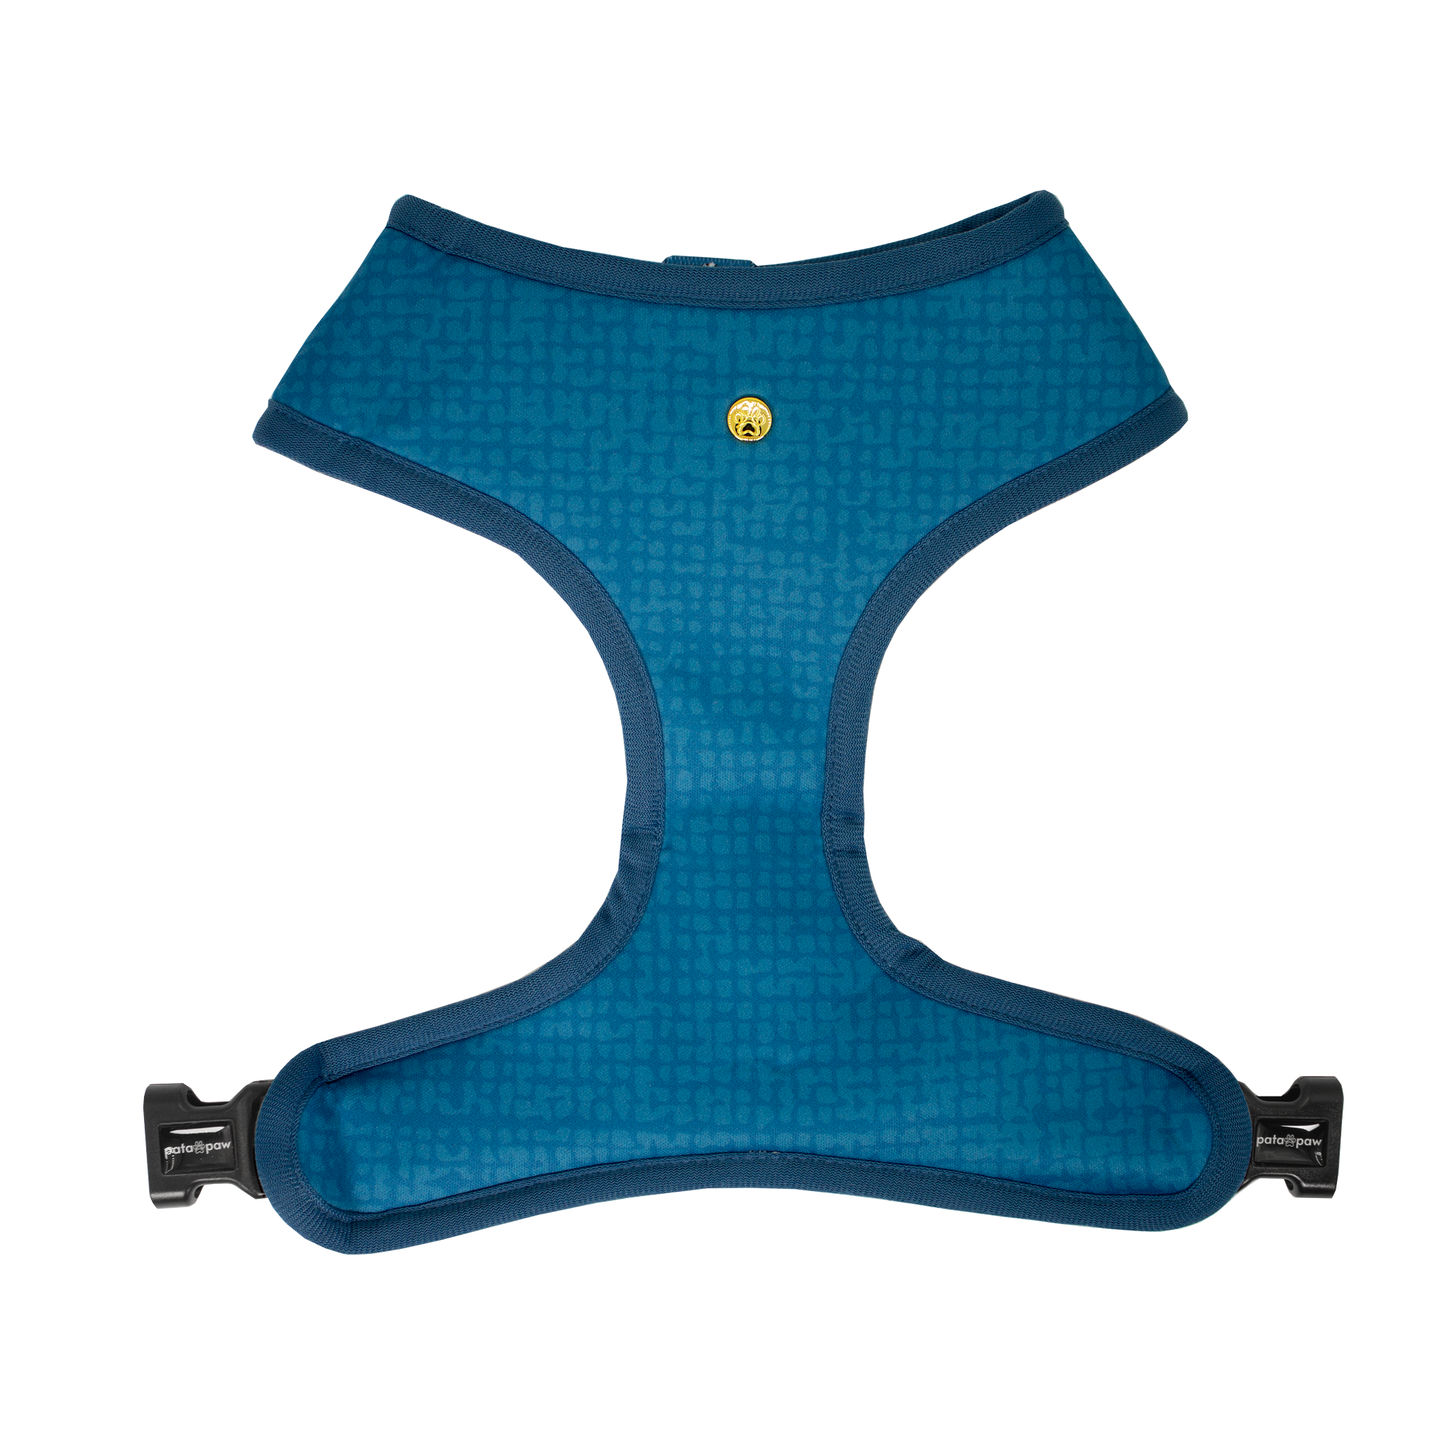 Pata Paw boops reversible harness showing a timeless and chic texture pattern in aegean blue.